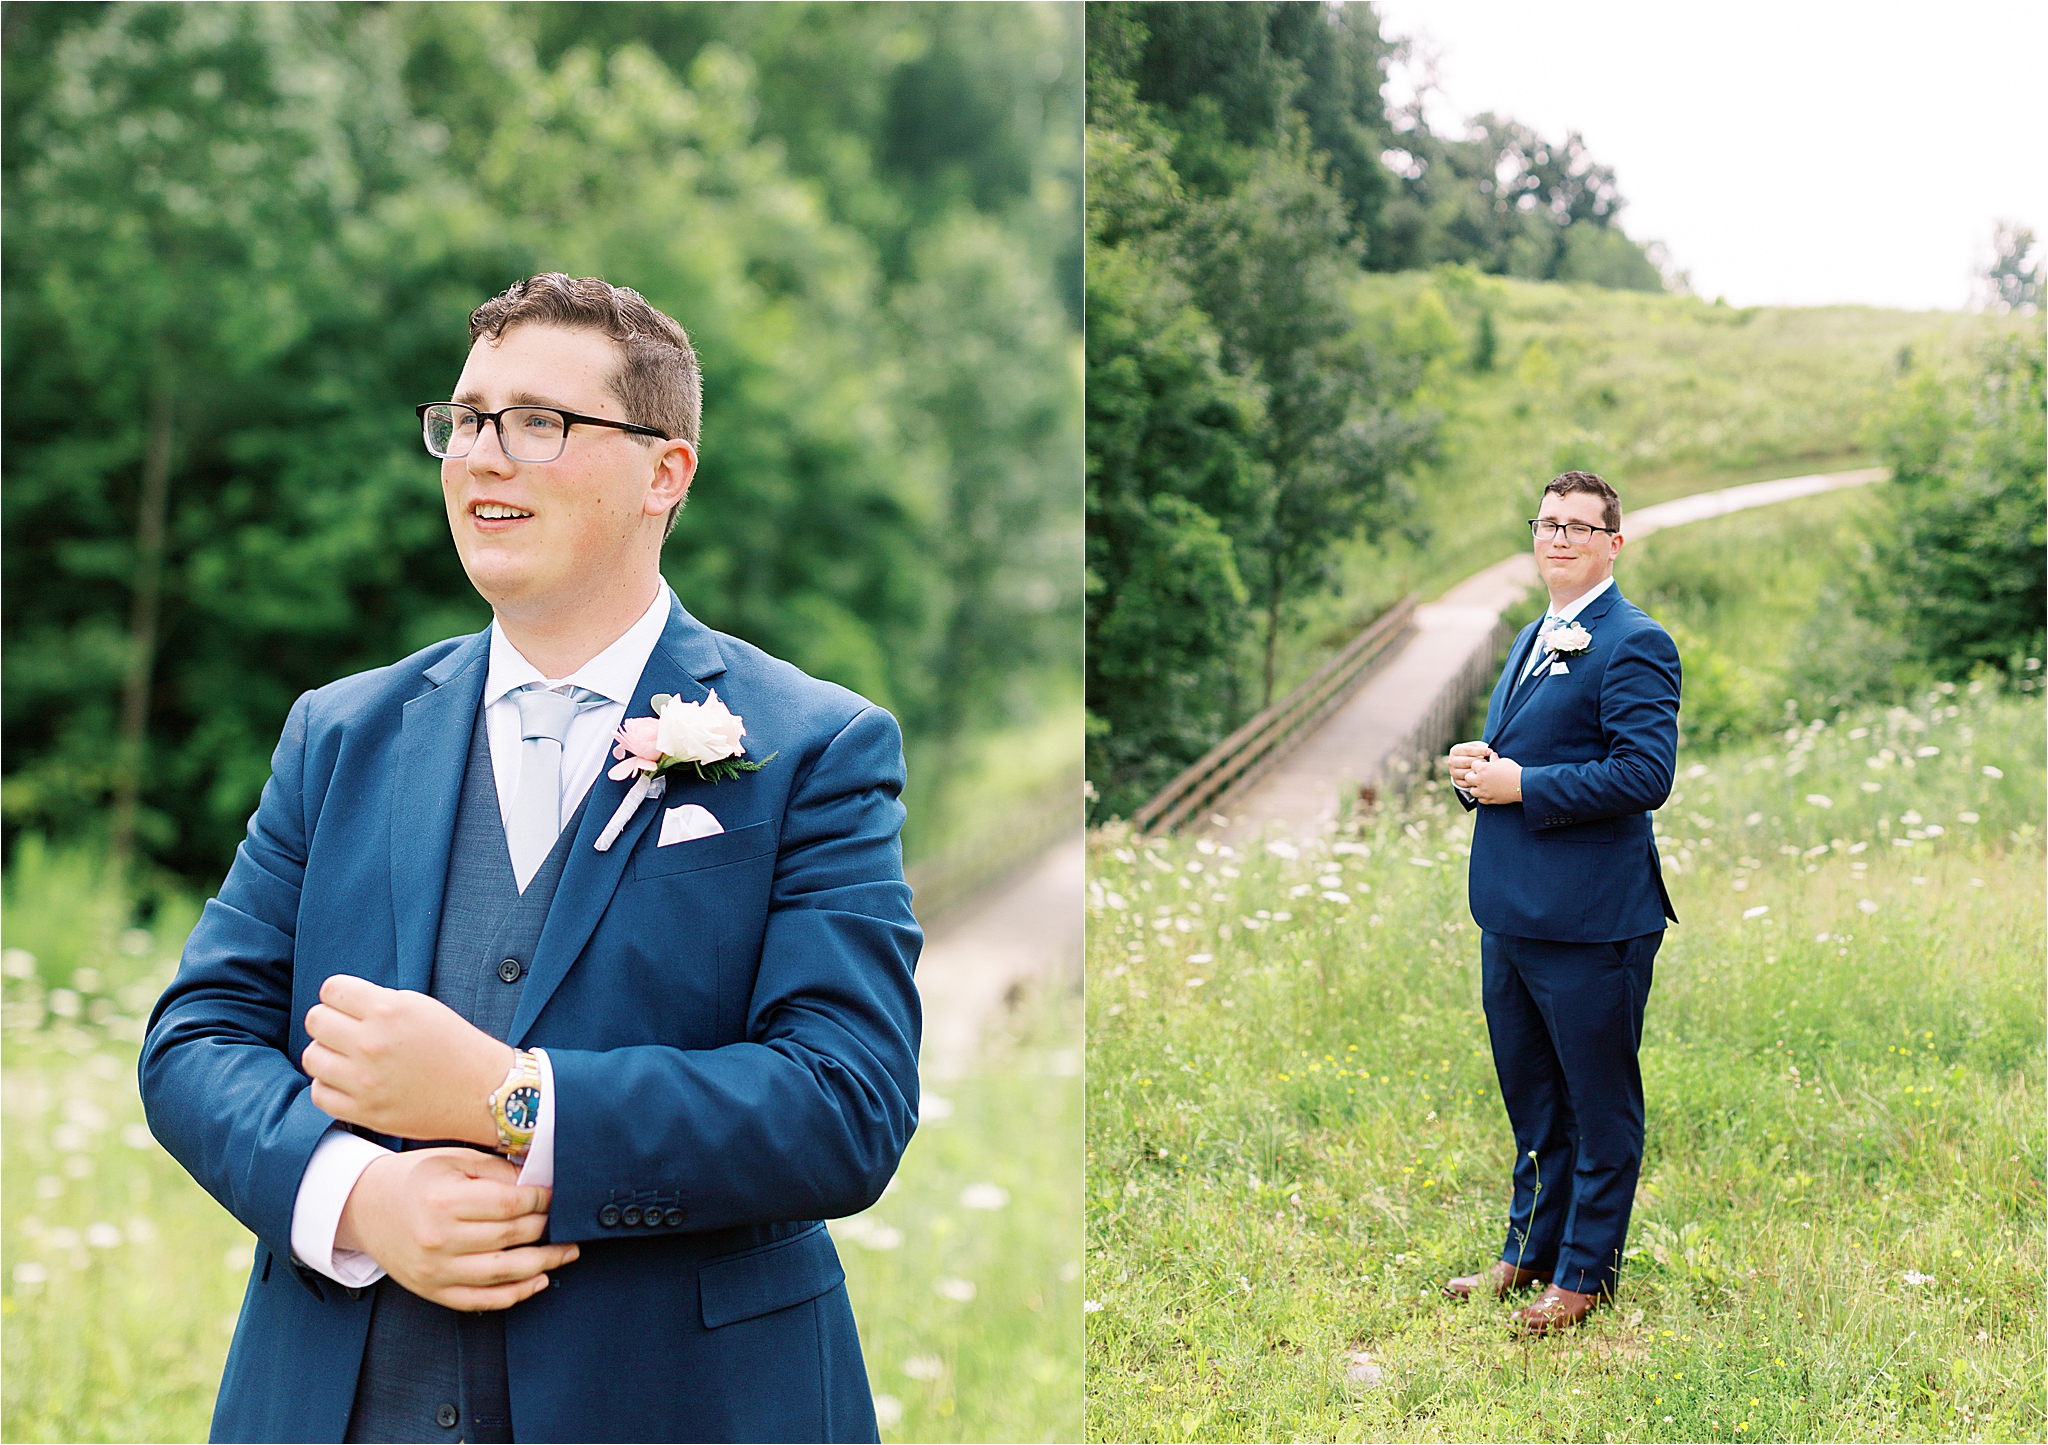 groom fixing cuff links in navy blue suit while in field